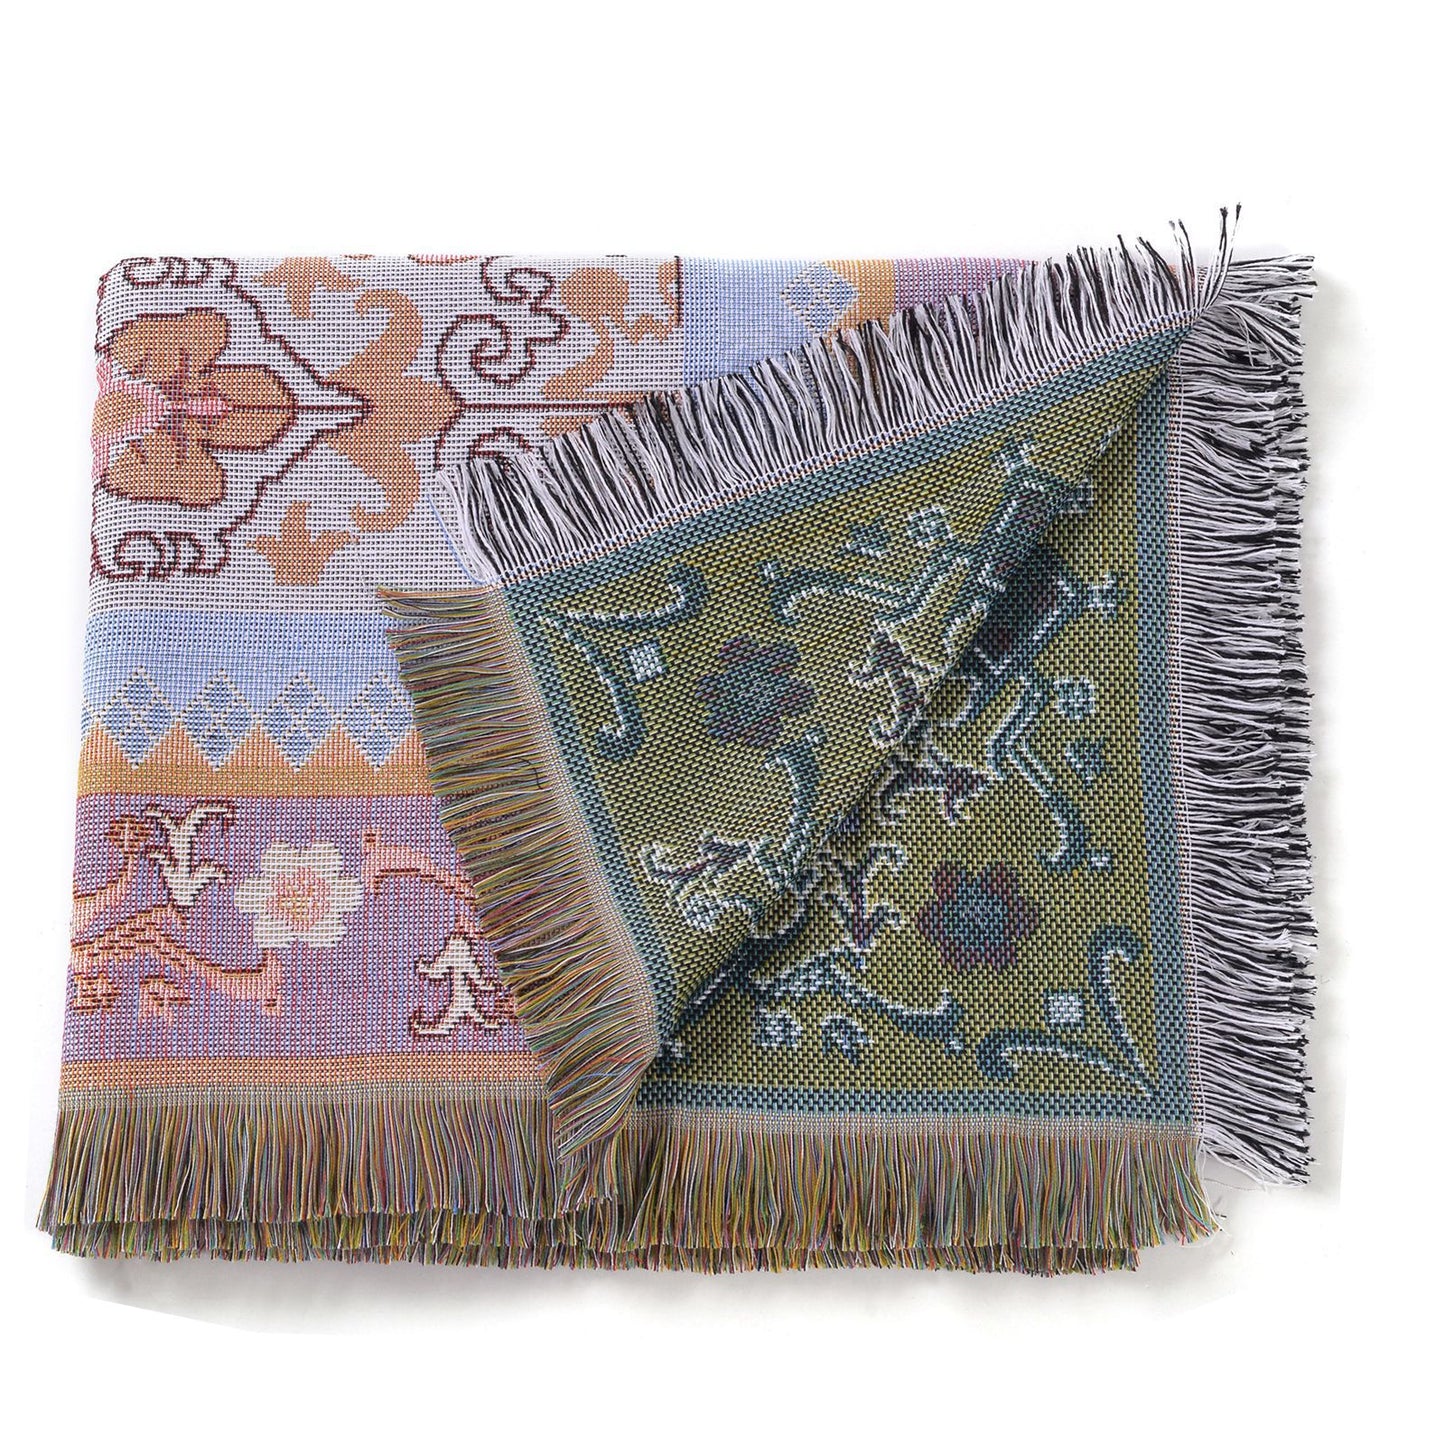 Woven Tapestry Throw Blanket Picnic Blanket Sofa Covers 130 x 160 CM